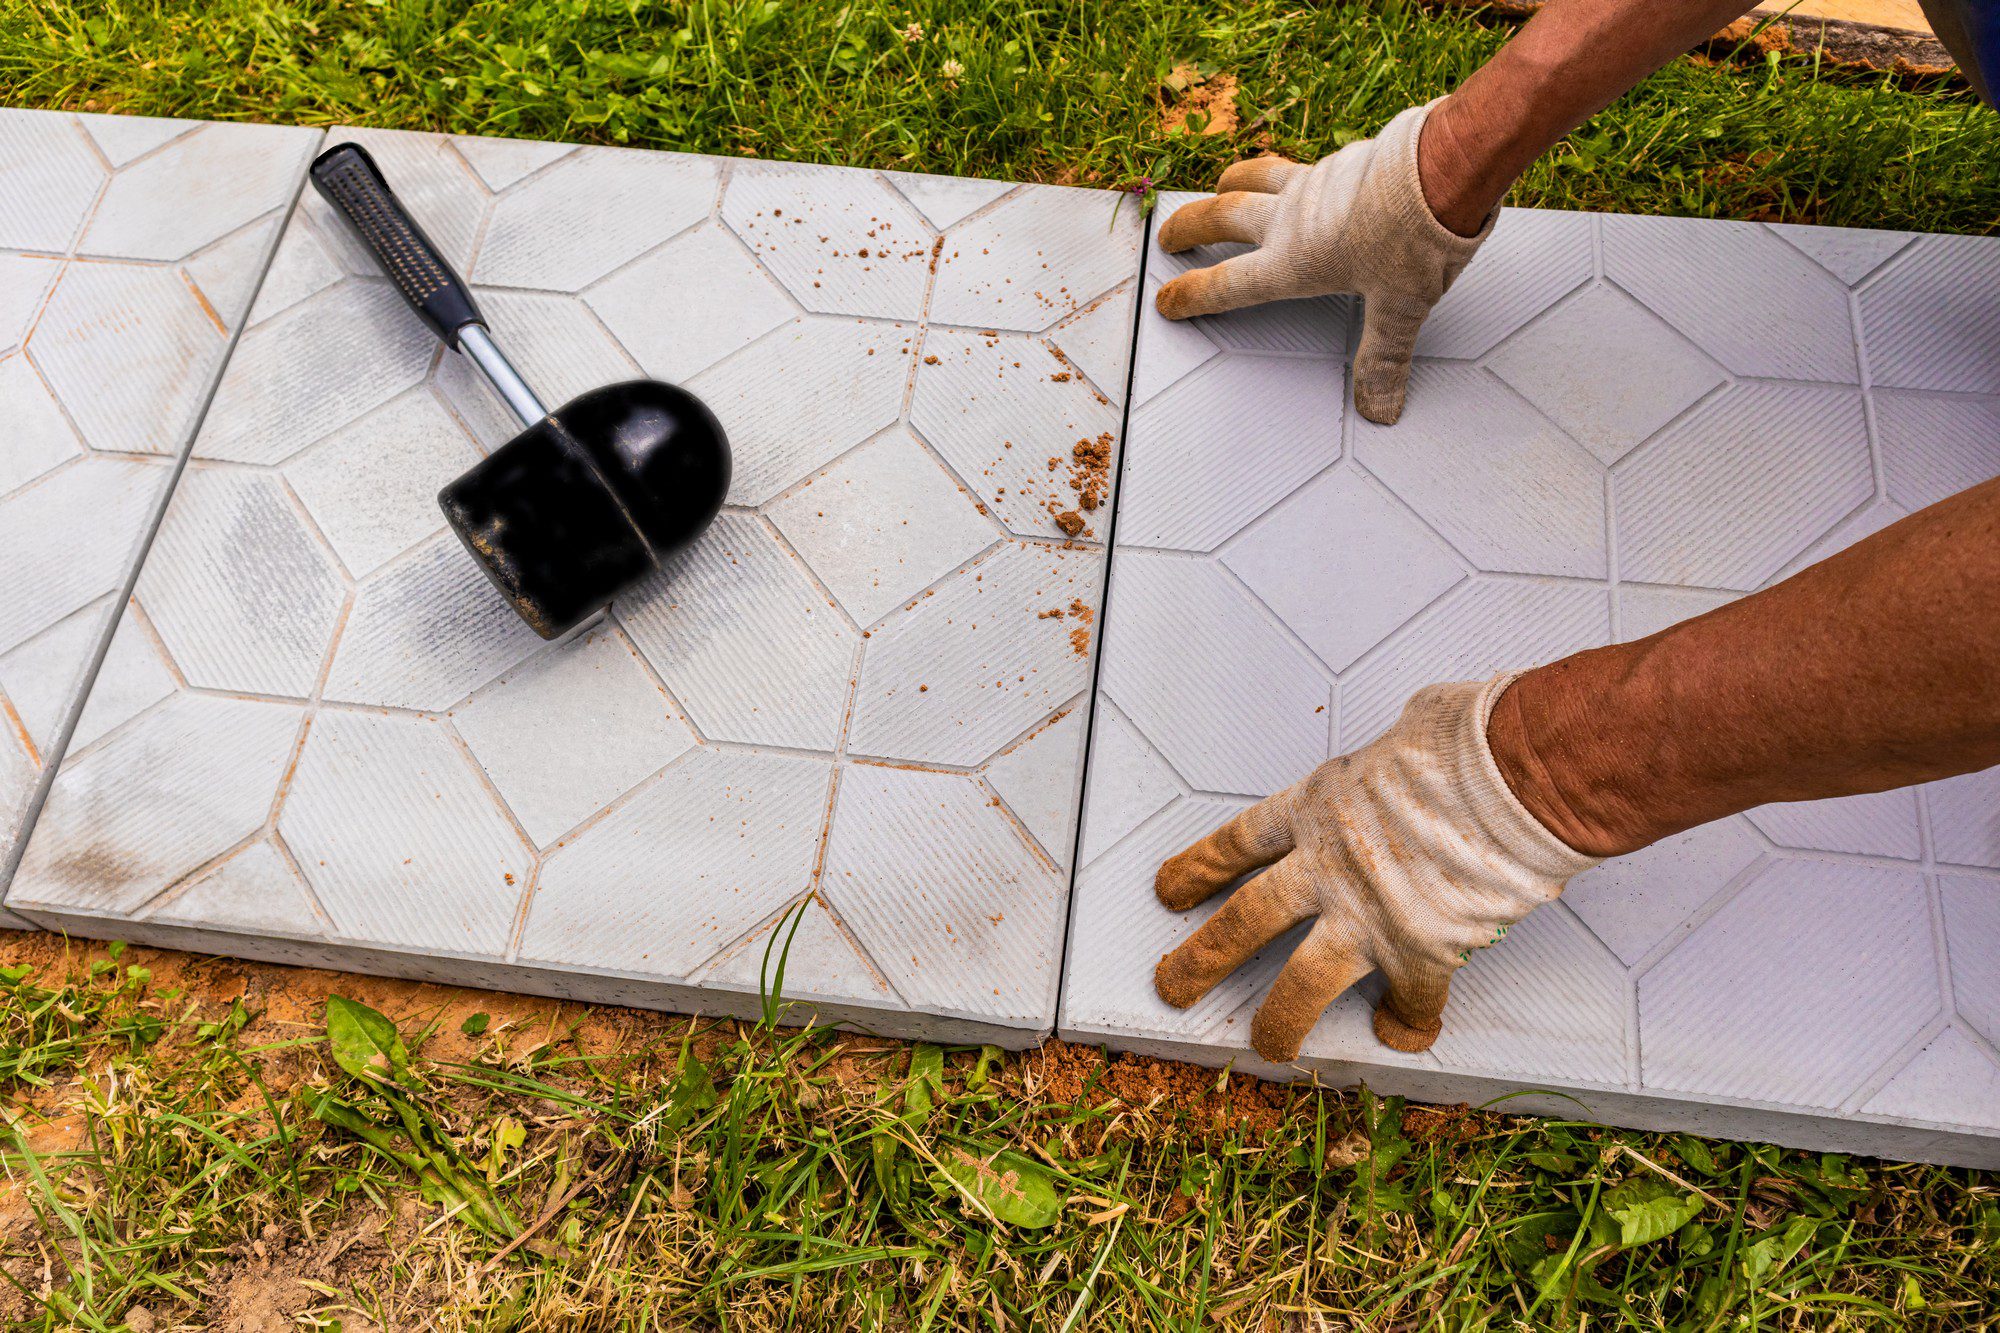 The image depicts a person laying interlocking tiles to create a pathway or patio area. The individual is wearing a pair of light-coloured work gloves, indicating some manual labour is being performed. In the upper left corner of the image, there is a rubber mallet, which is typically used in tile setting to gently tap tiles into place to ensure proper leveling and placement without cracking them. The tiles have a geometric, hexagonal design and appear to be light grey in colour. The grass around the installation area suggests this work is taking place outdoors, and the presence of soil and grass cuttings hint at recent groundwork preparation.